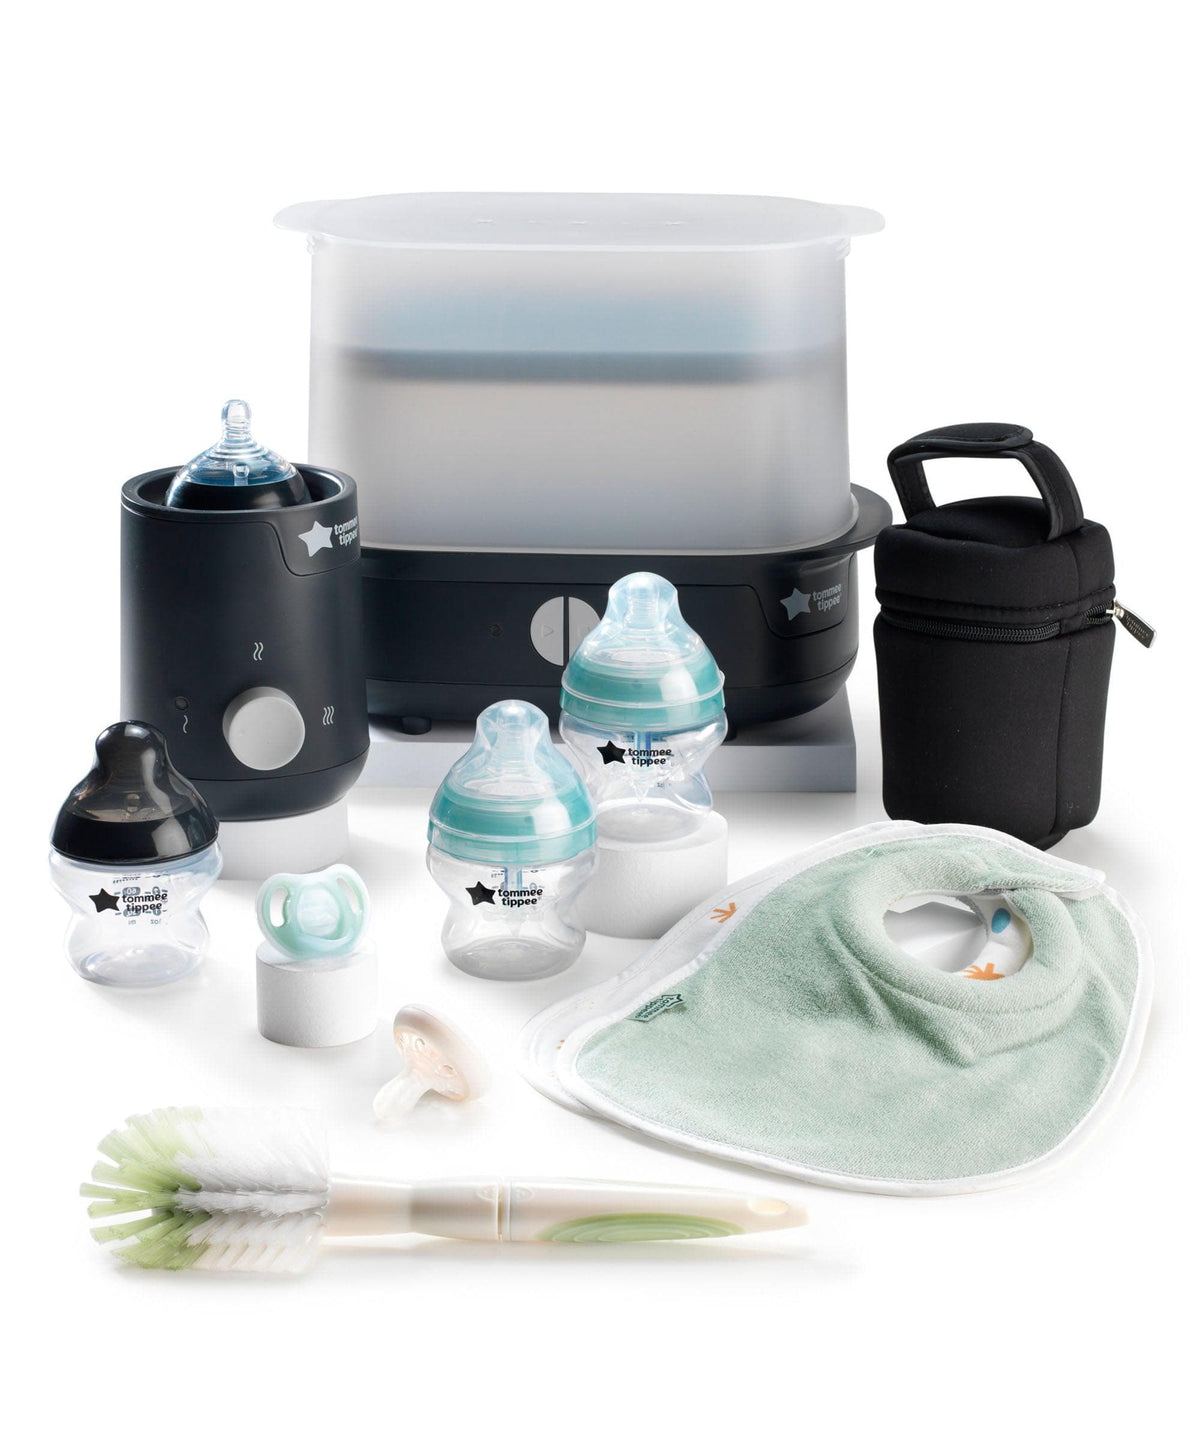 Tommee Tippee Closer to Nature Complete Feeding Kit - Black